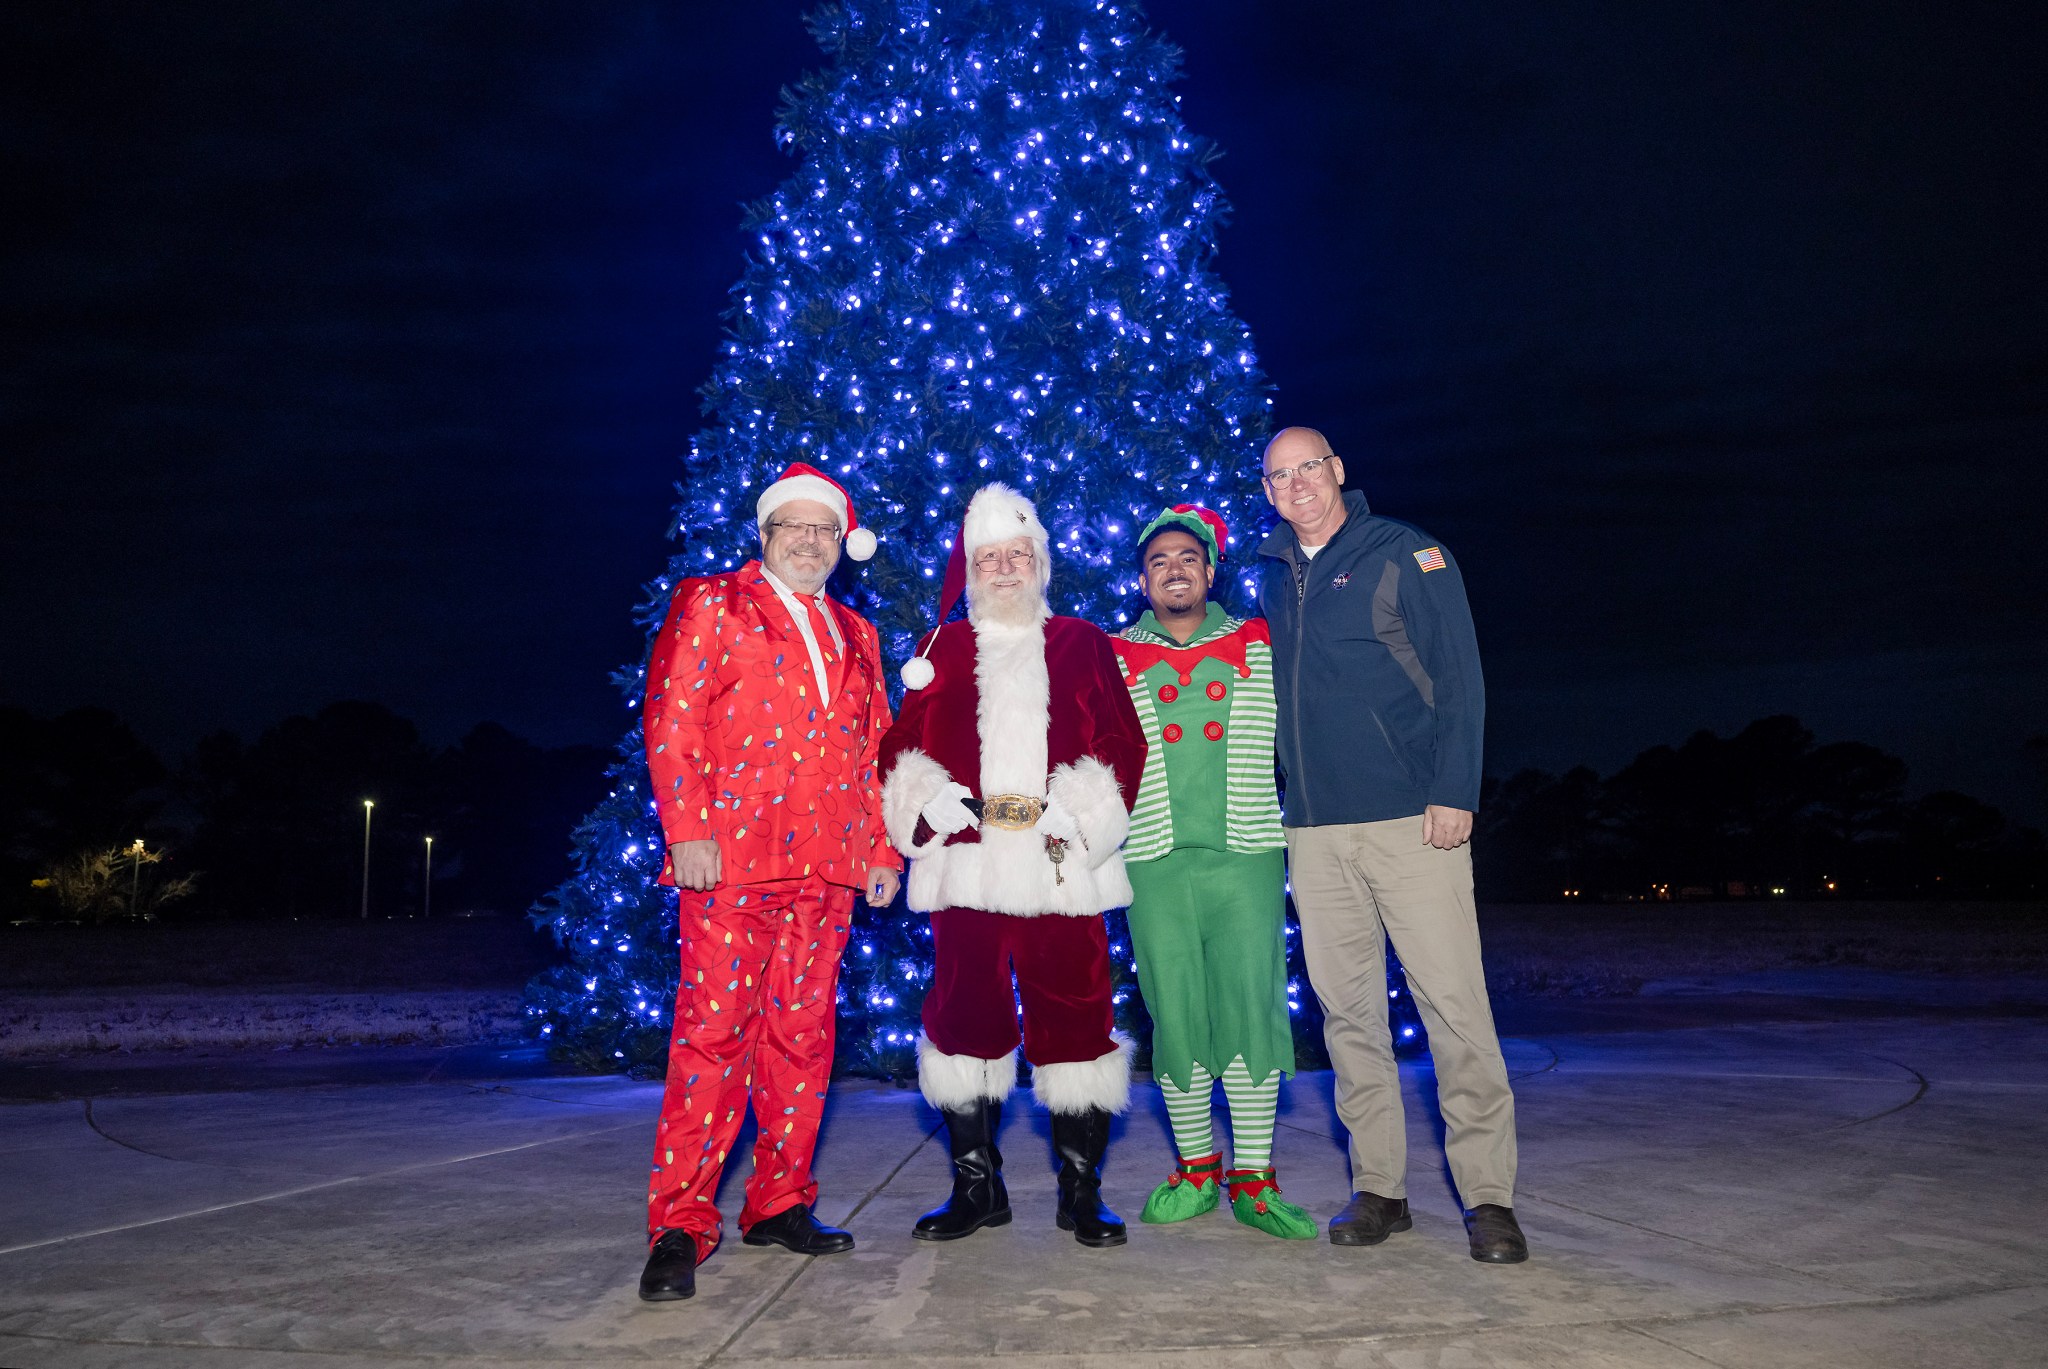 From left, Robert Champion, director of the Office of Center Operations at Marshall, Santa Claus, Lance D. Davis, Marshall news chief who is dressed as an elf, and Bill Marks, deputy director of Center Operations, smile for a photo after the tree-lighting ceremony.